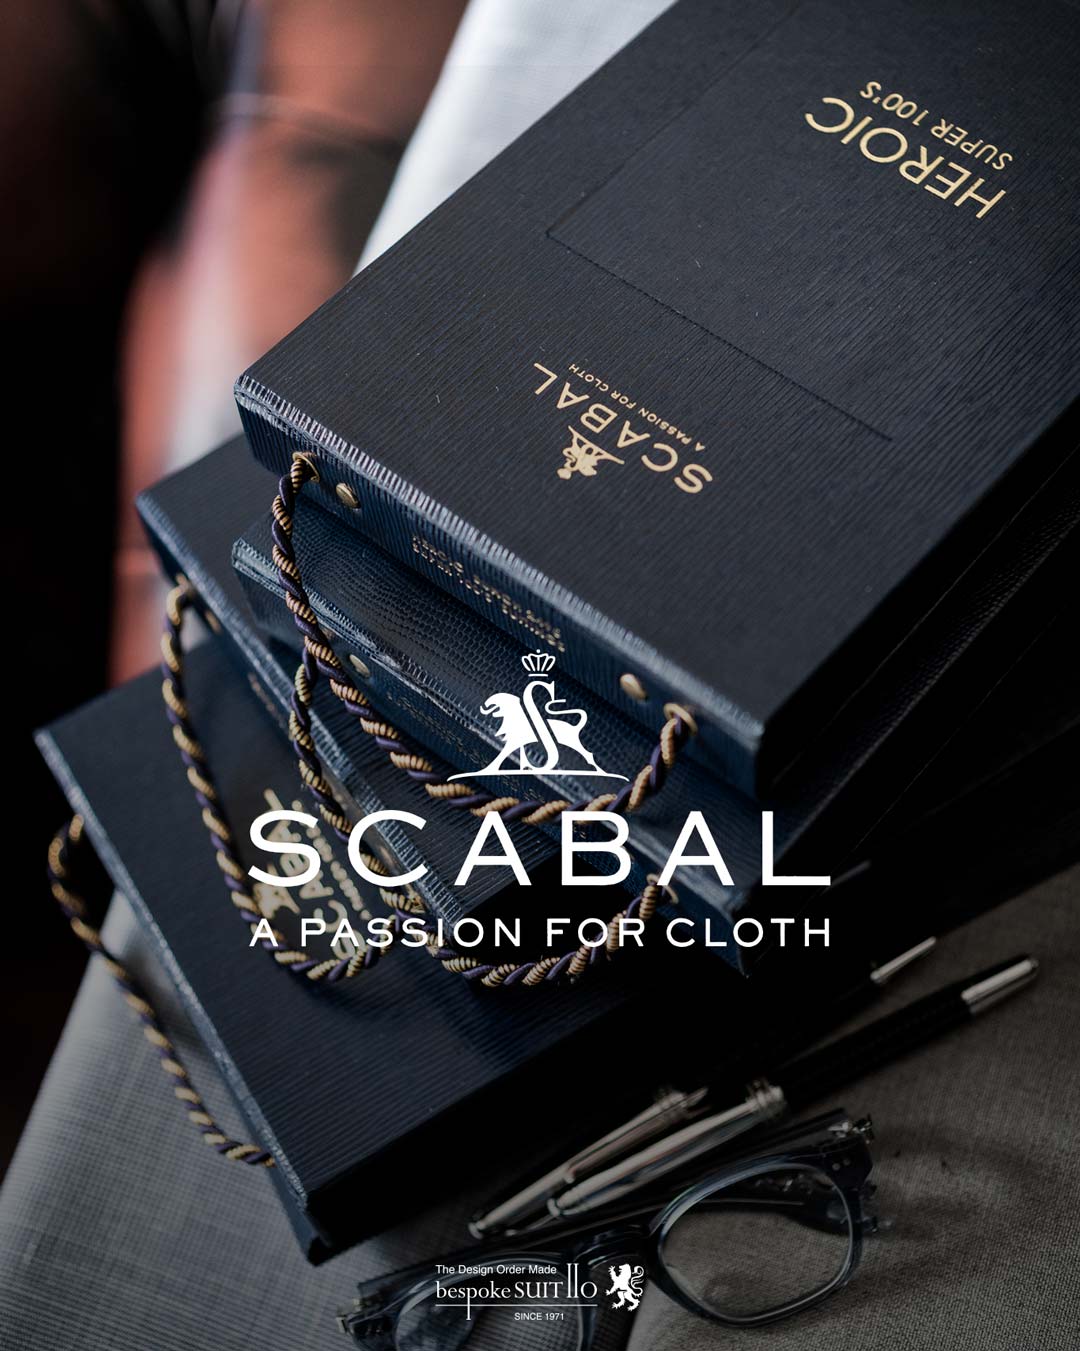 ☆SCABAL（スキャバル）フェアー ～30%OFF｜北九州のオーダースーツ SUIT110